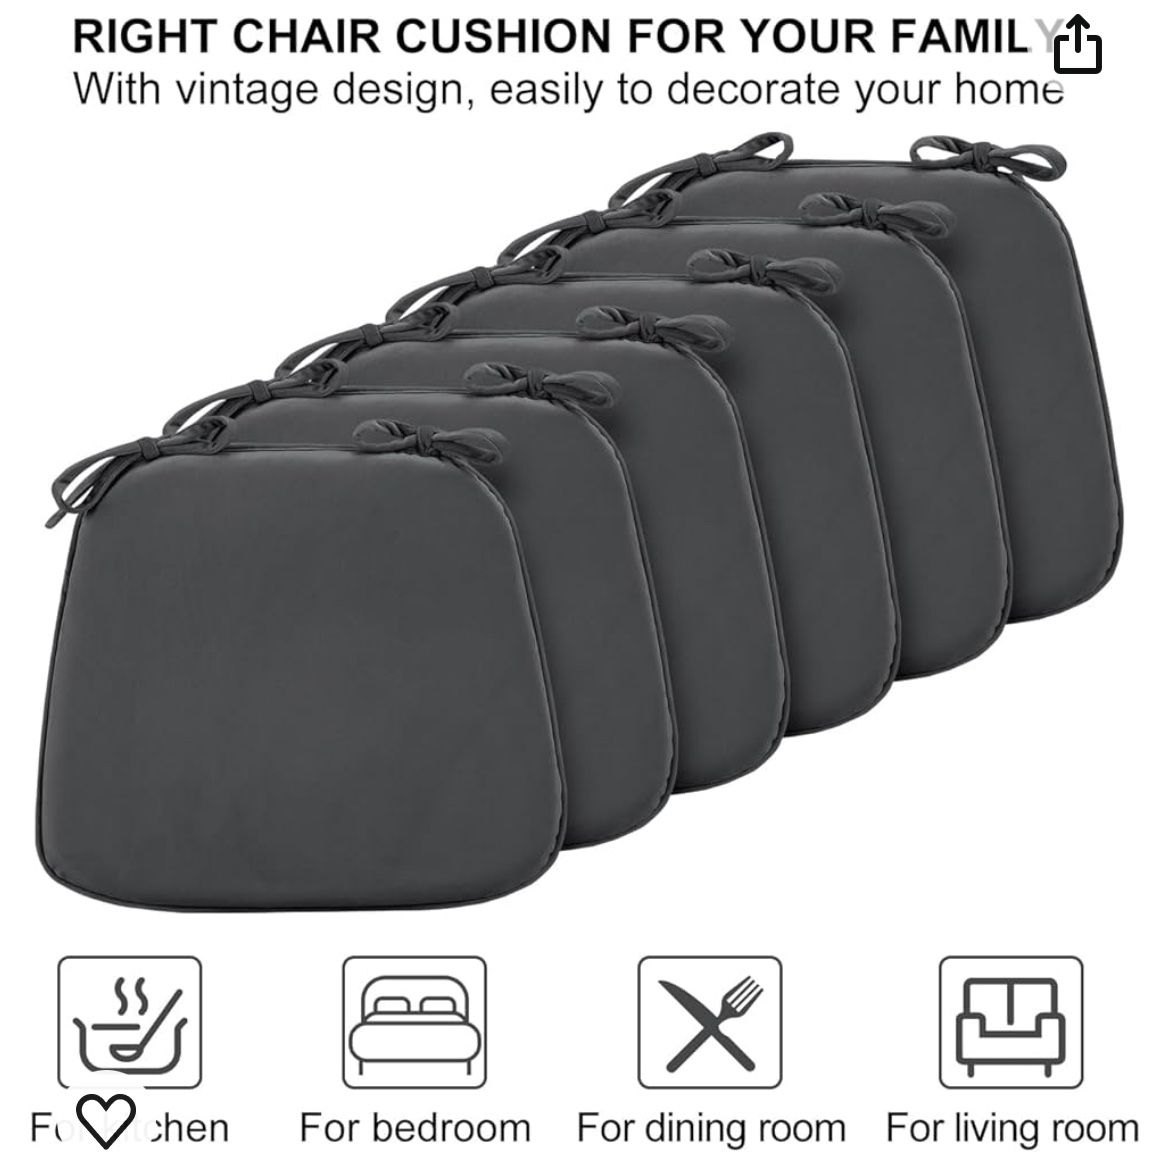 LOVTEX Chair Cushions For Dining Chairs 6 Pack